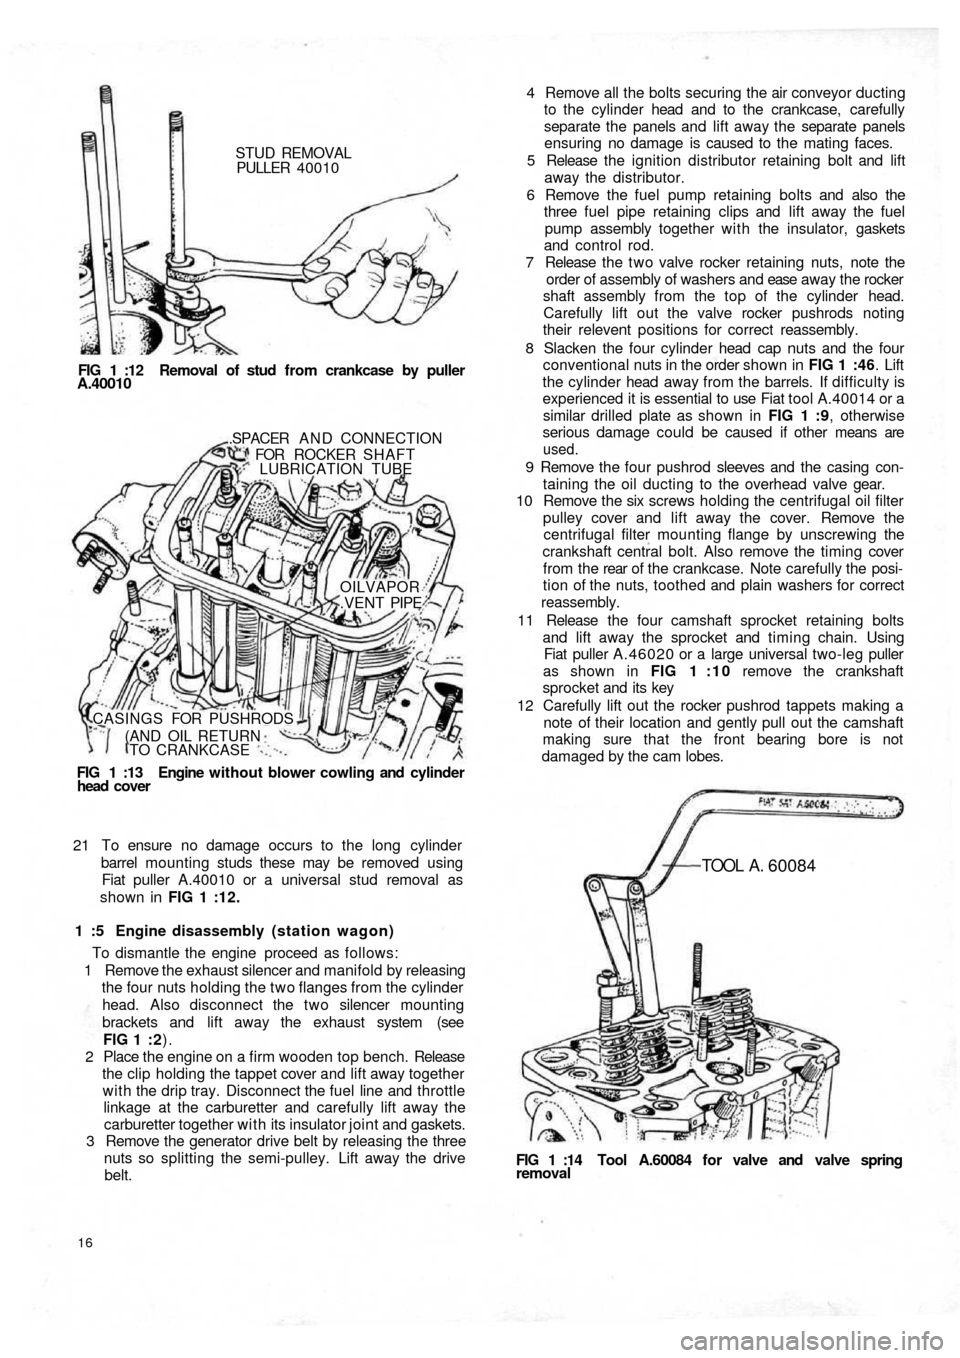 FIAT 500 1972 1.G Workshop Manual STUD REMOVAL
PULLER  40010
FIG 1 :12  Removal of stud from crankcase by puller
A.40010
FIG  1  :13   Engine  without blower cowling and cylinder
head  cover.SPACER  A N D  CONNECTION
FOR ROCKER SHAFT
